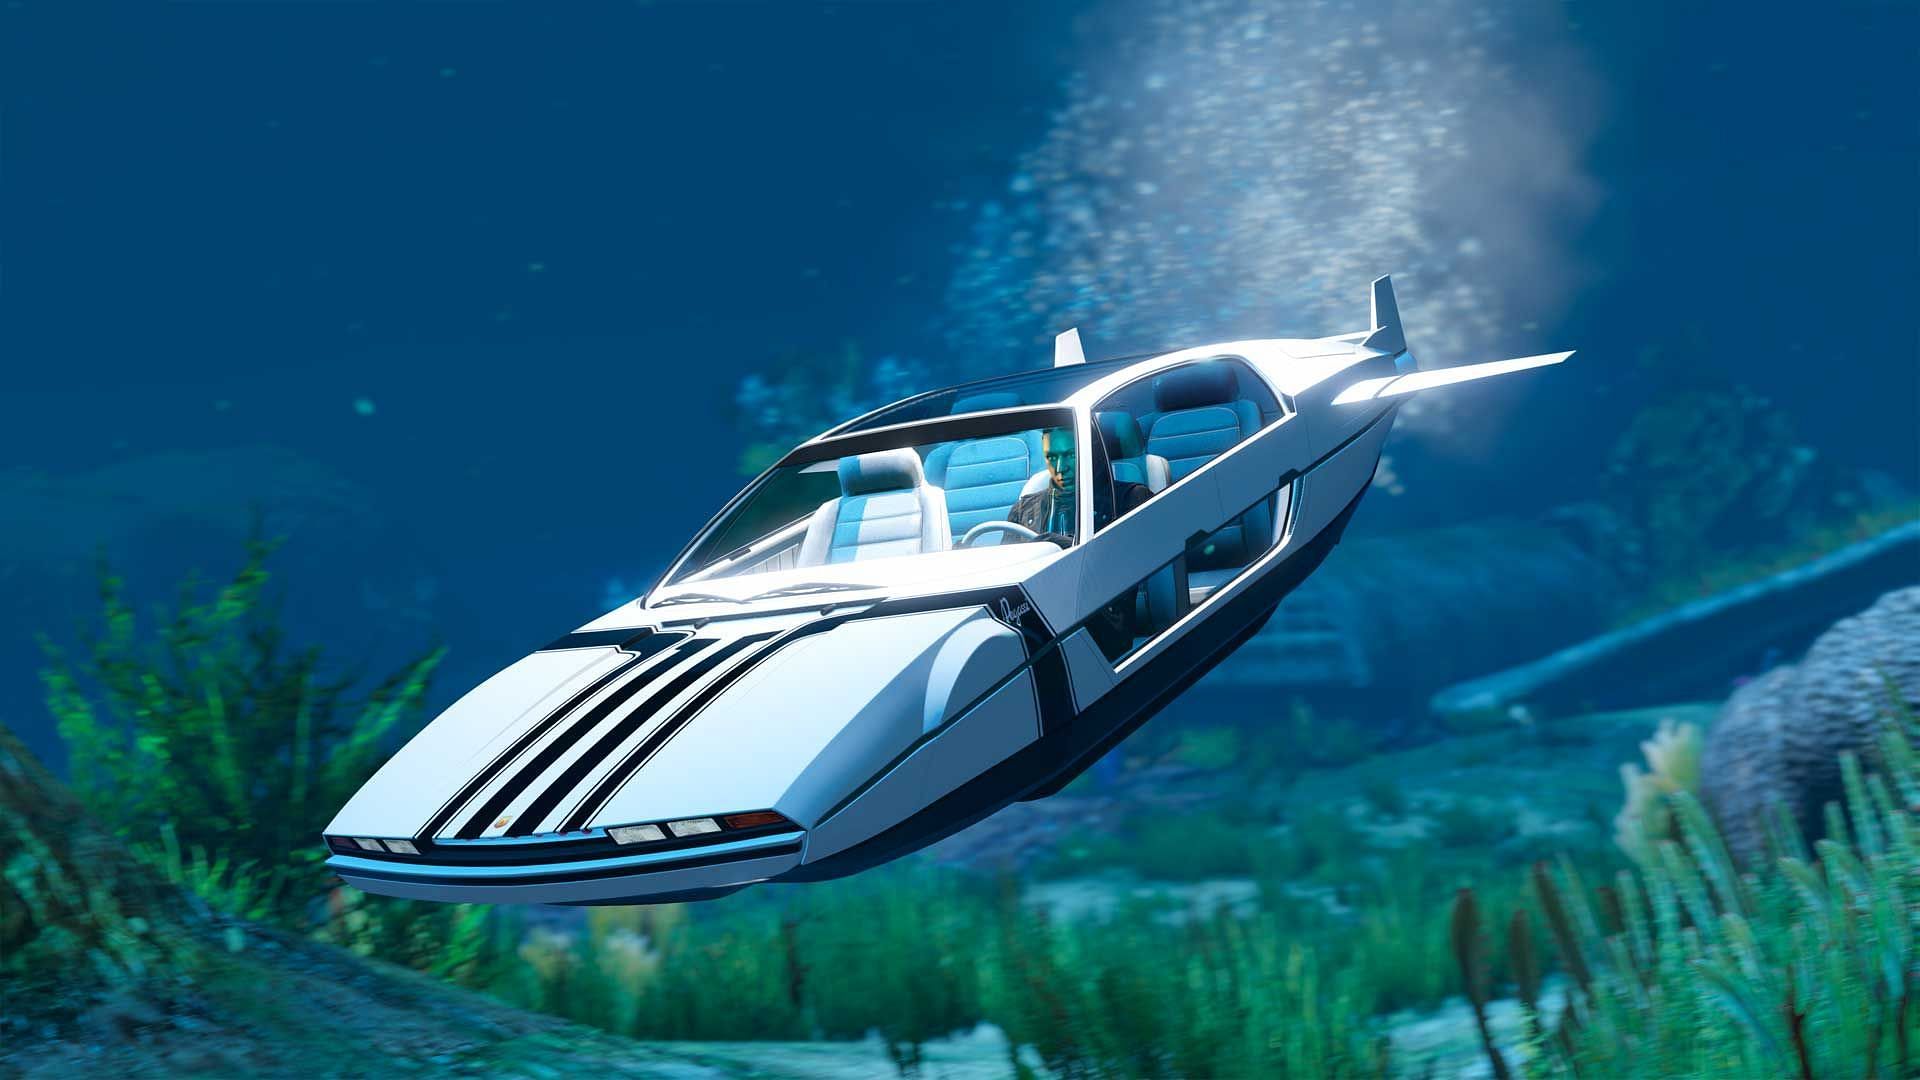 It is a submersible vehicle (Image via Rockstar Games)